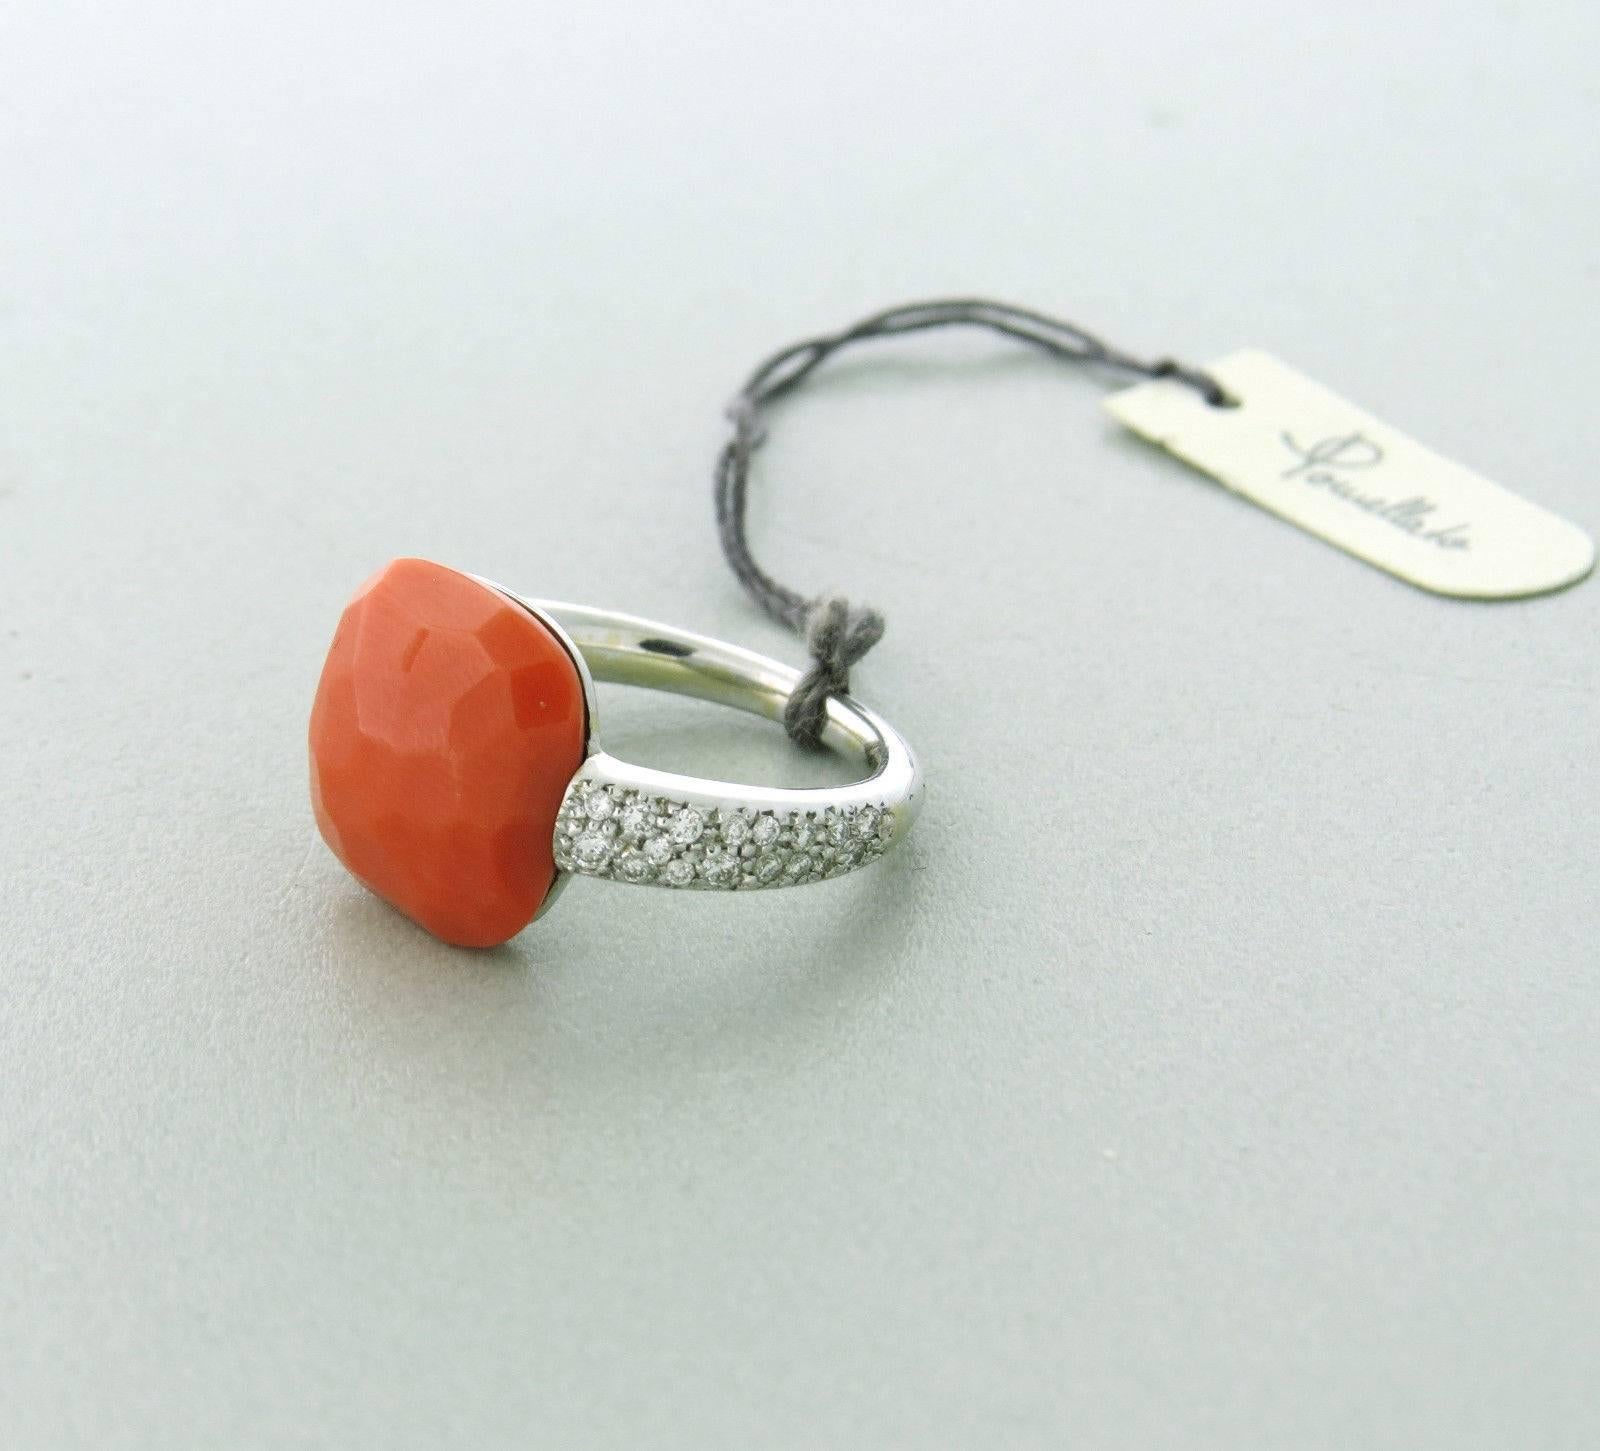 Cute 18k gold ring, crafted by Pomellato for Capri collection, decorated with coral gemstone, surrounded with approximately 0.26ctw in diamonds. Ring size - 6 - 6 1/2, ring top is 13mm x 13mm .  Weight - 7.0 grams